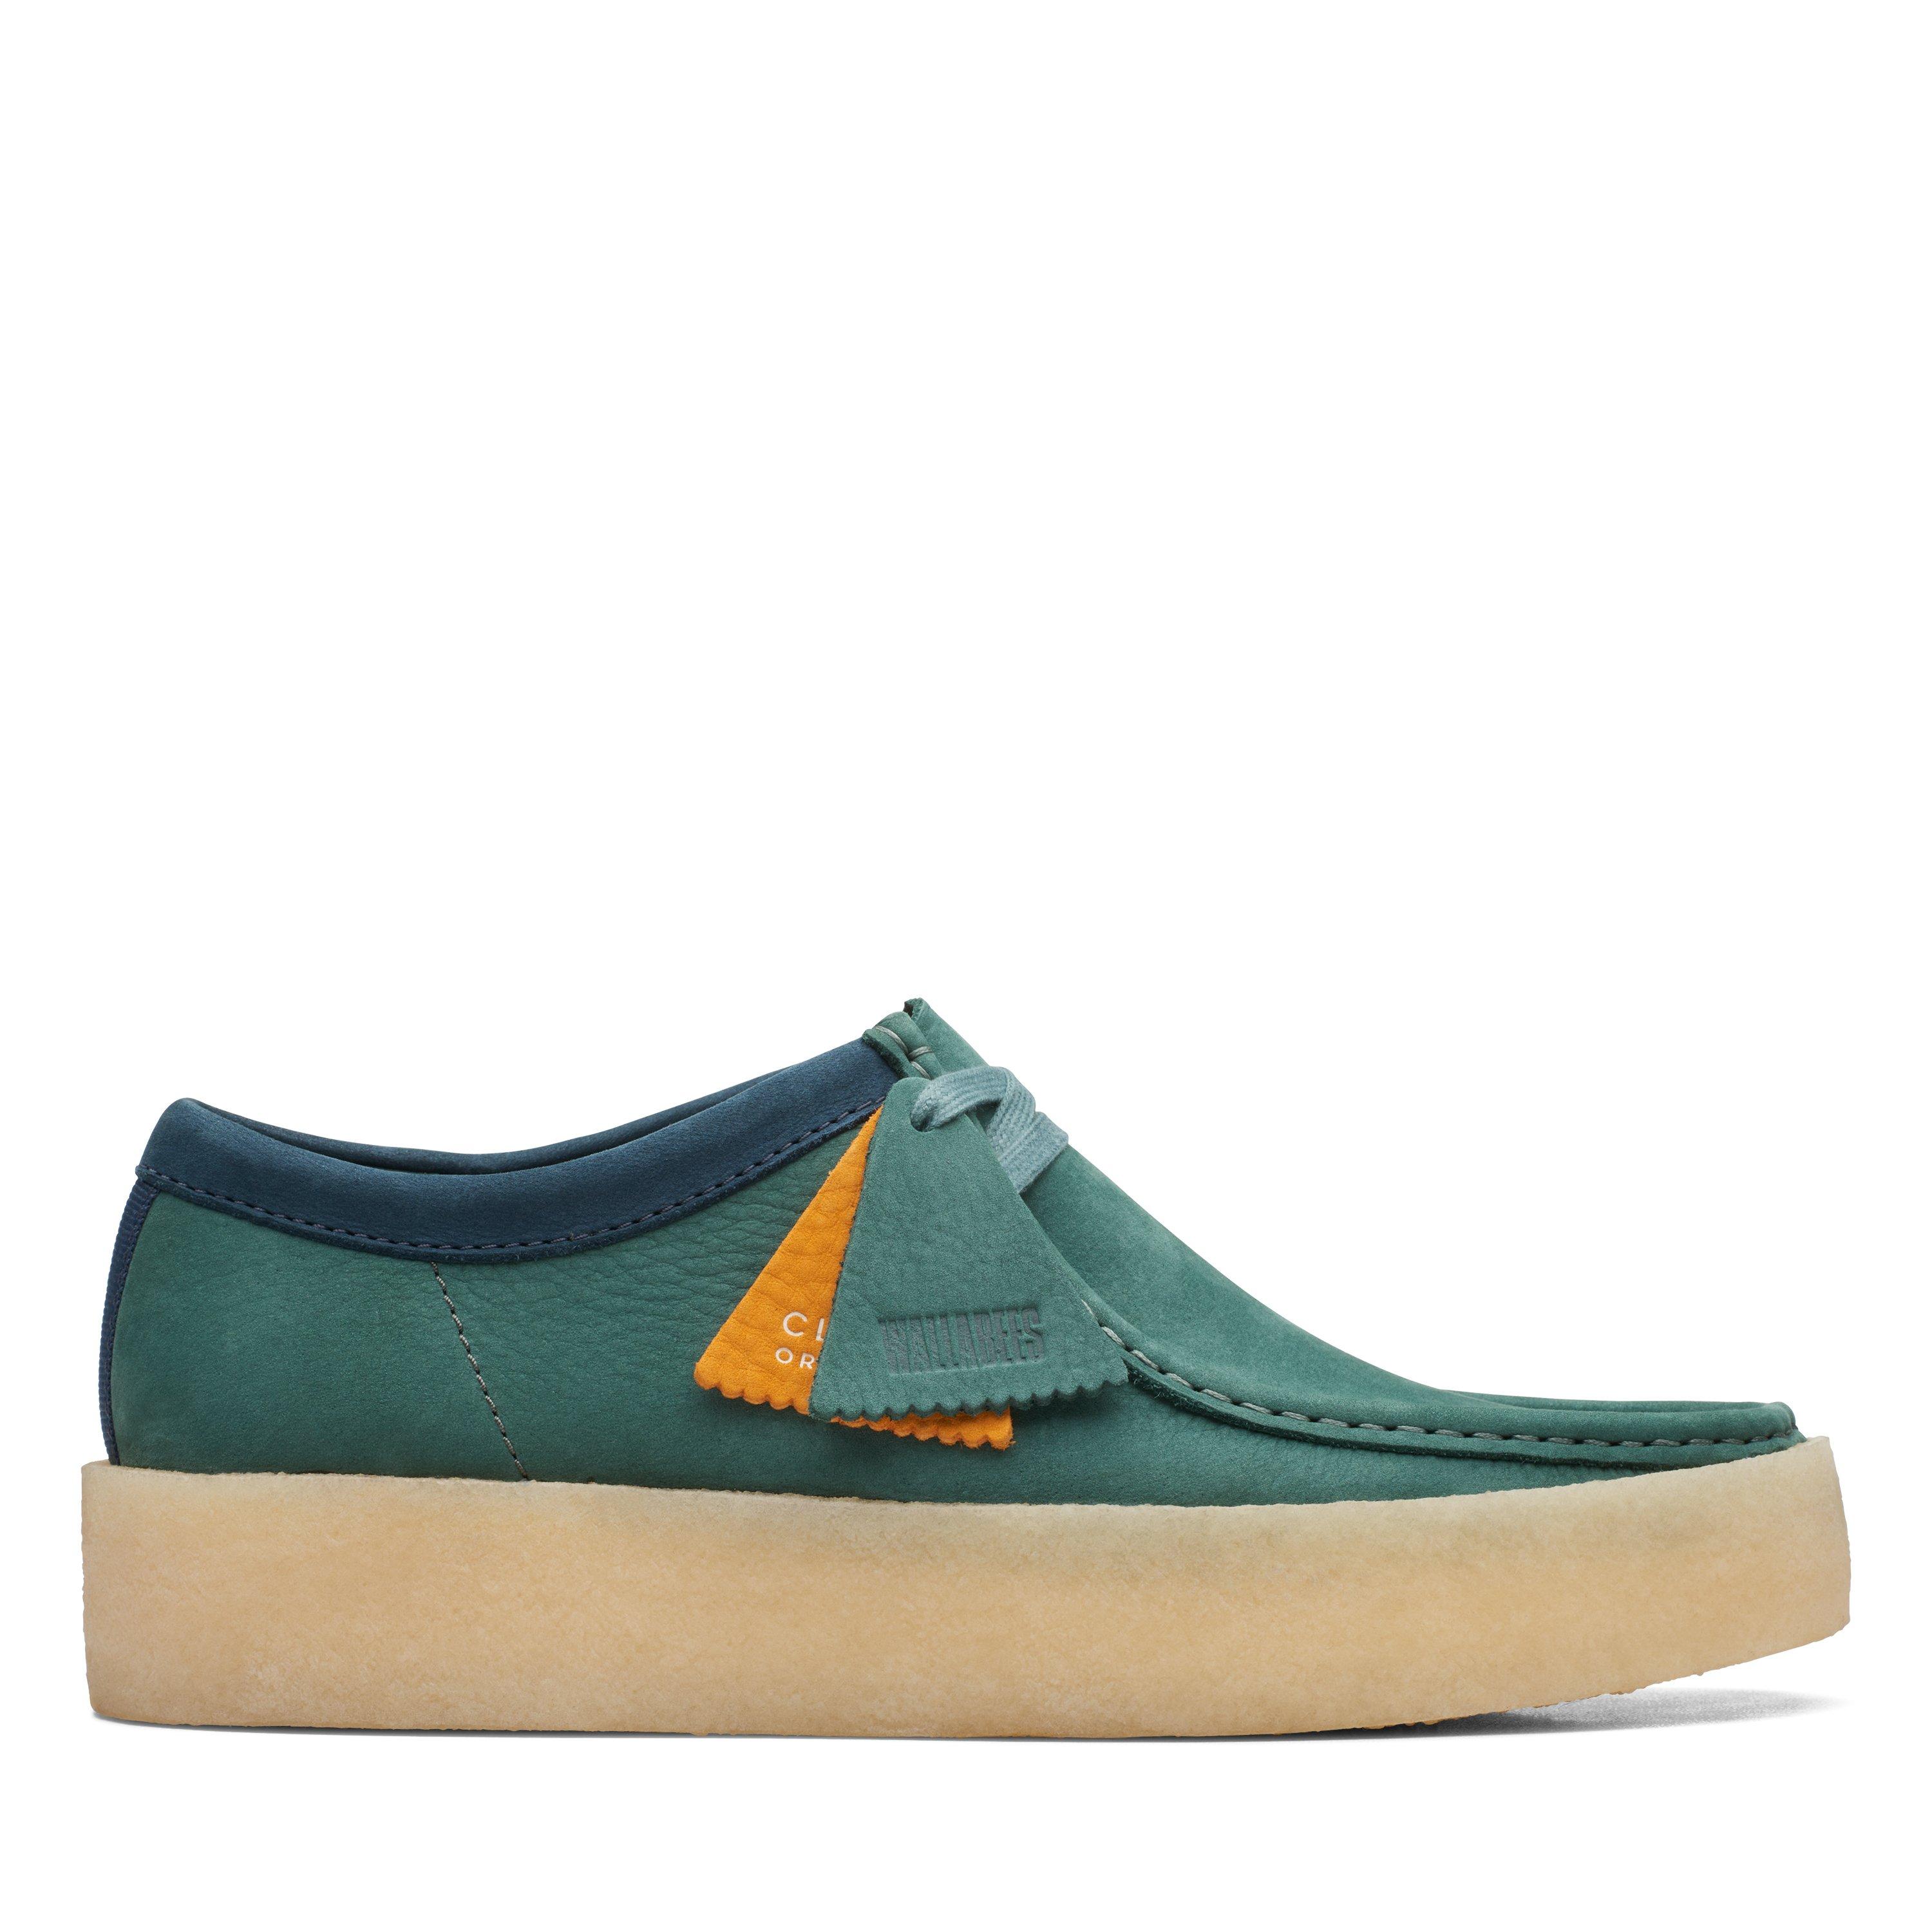 Clarks Wallabee! Voor de heb!  Sneakers men fashion, Mens casual leather  shoes, Clarks shoes mens